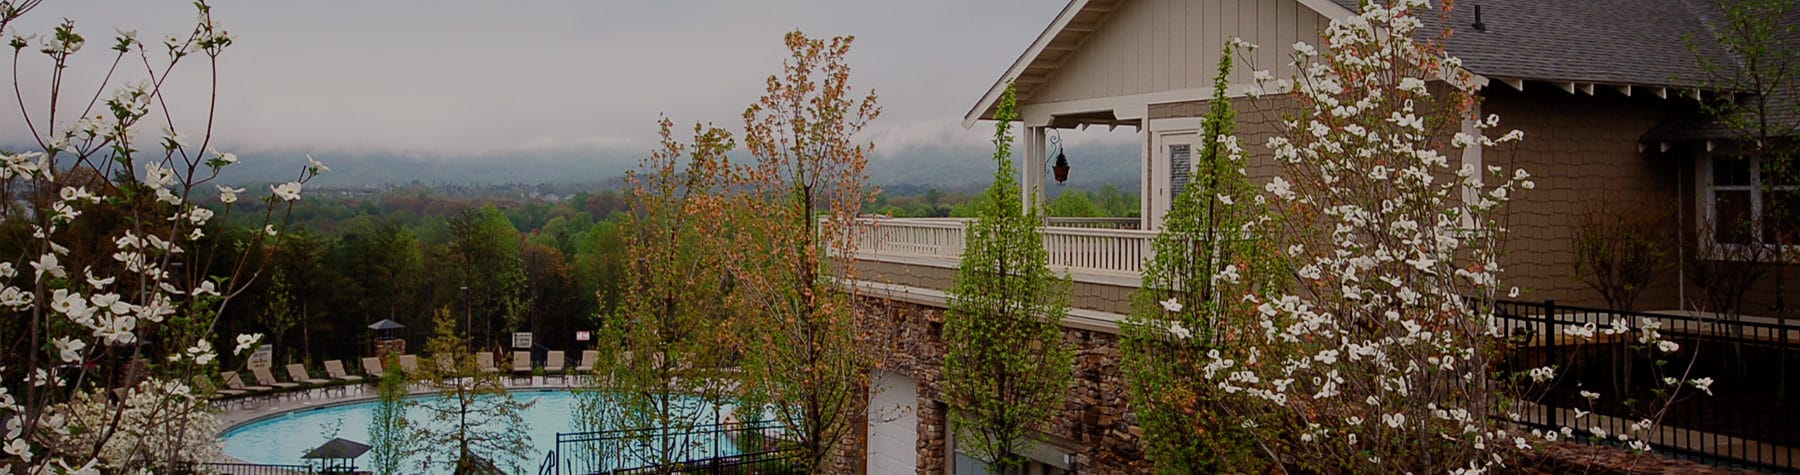 Beautiful Views at Woodlands of Charlottesville Luxury Condo Rentals